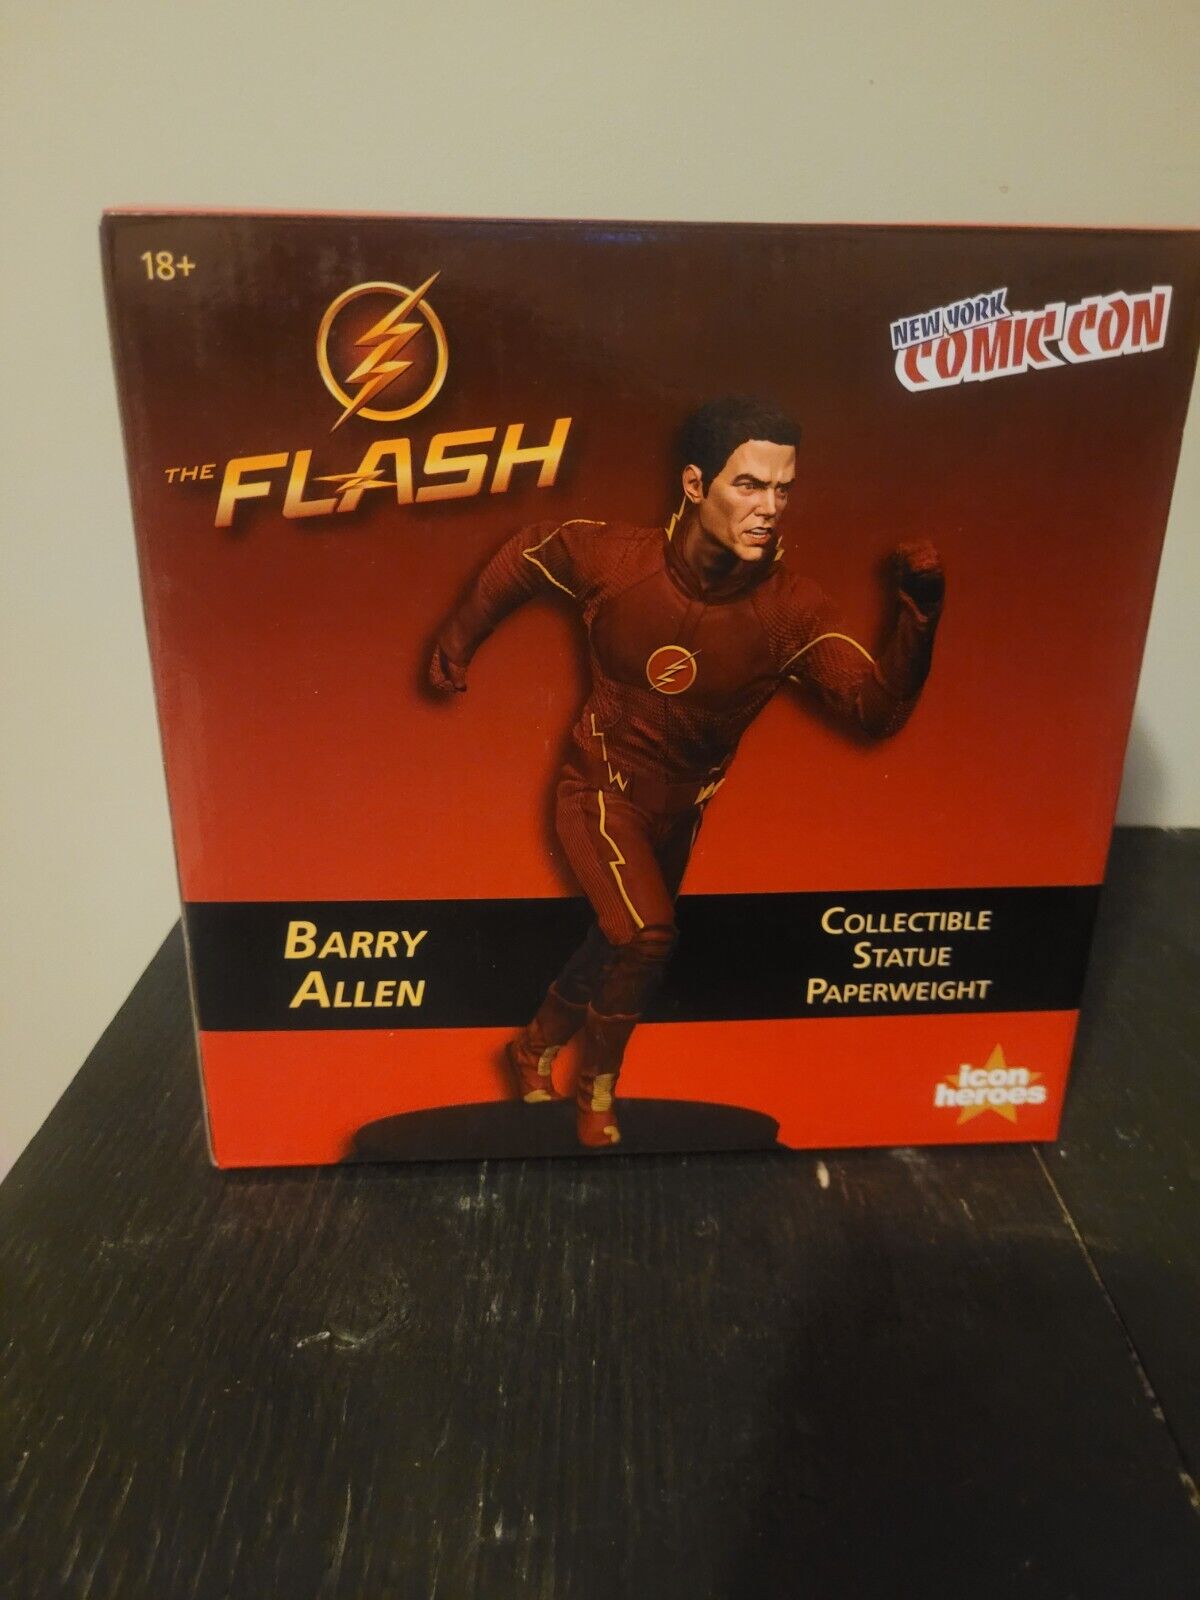 The Flash Barry Allen Collectible Stature # 466 of 500 RARE in box